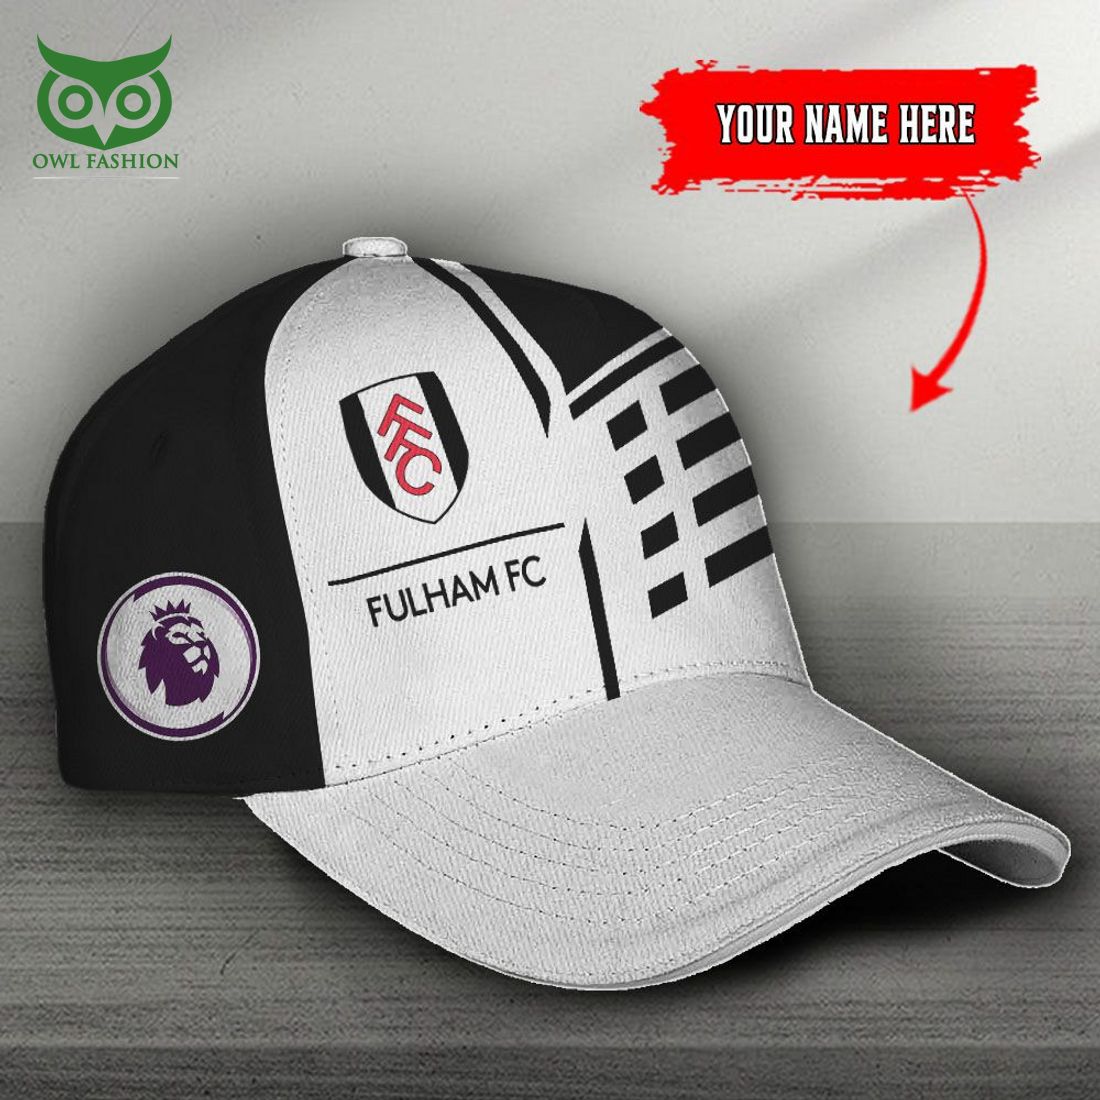 Fulham Premier League Limited Classic Cap You always inspire by your look bro